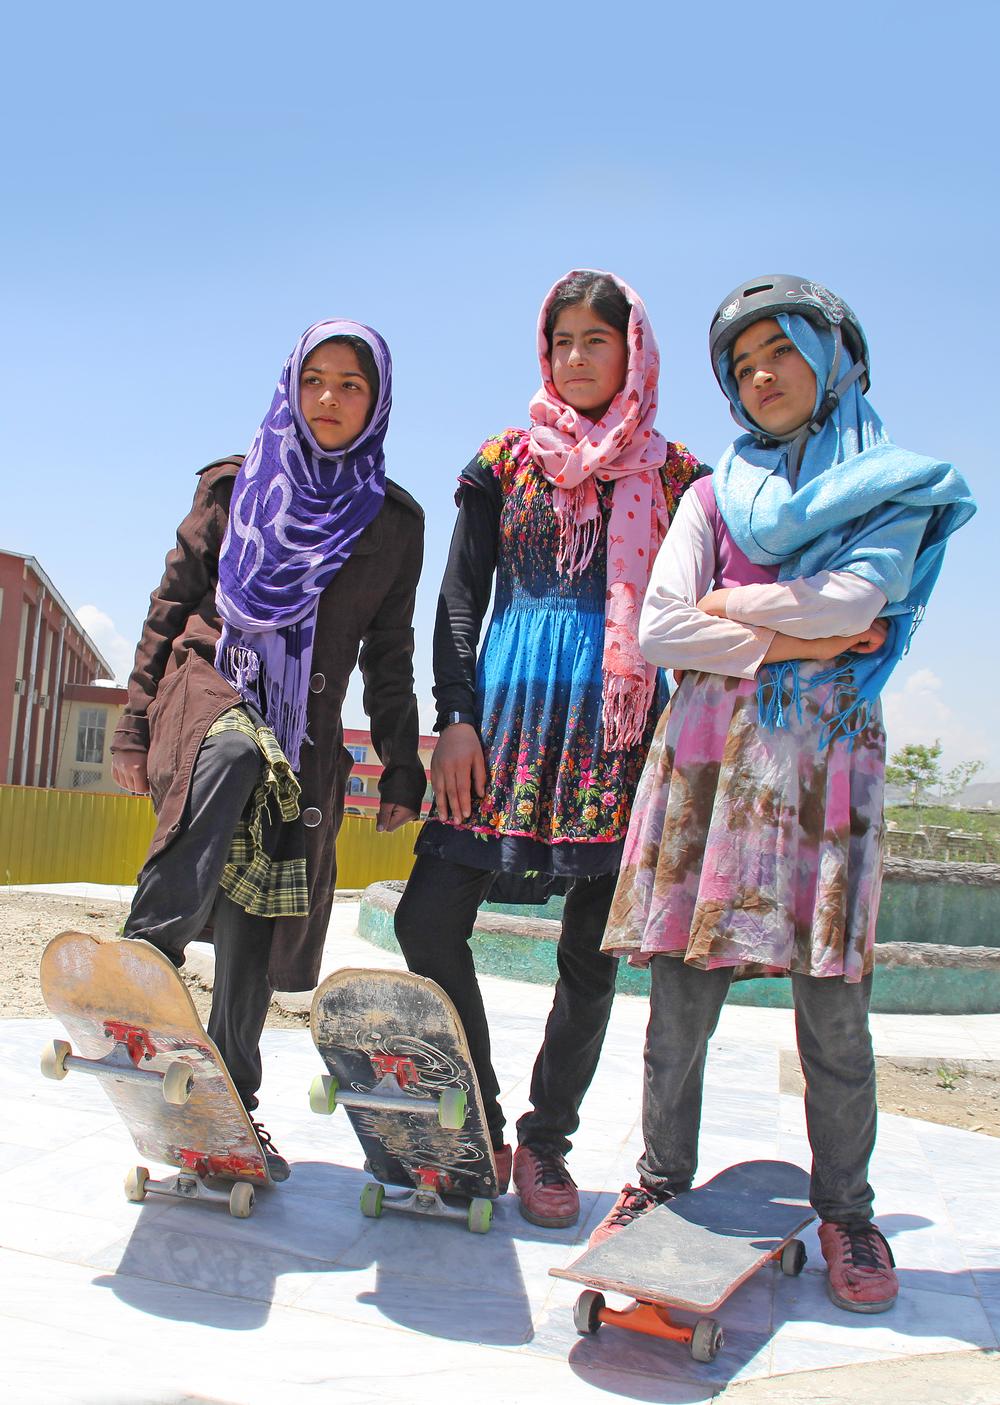 In Afghanistan, it’s considered inappropriate for girls to ride bikes, but skateboarding does not have the same stigma / photo © Hamdullah Hamdard